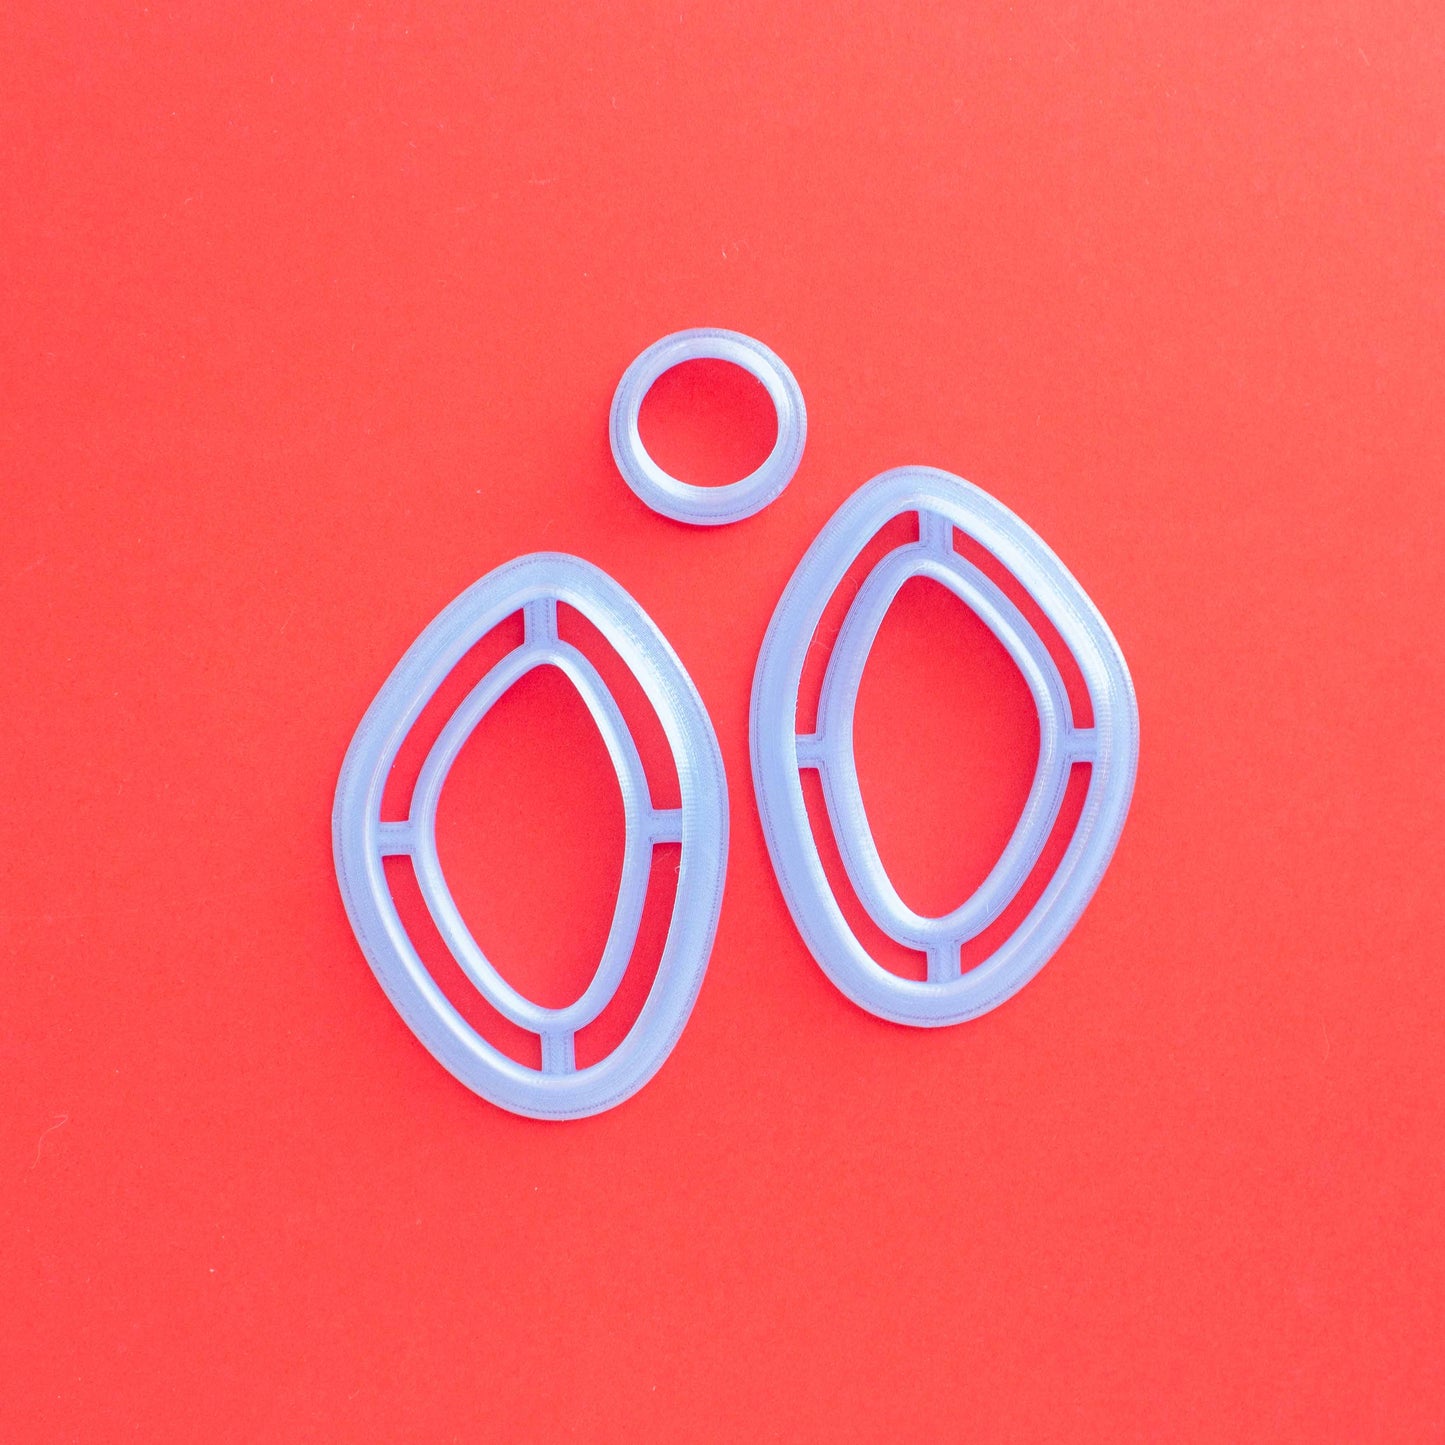 A set of two mirrored organic oval cutters and a stud on a red background. 